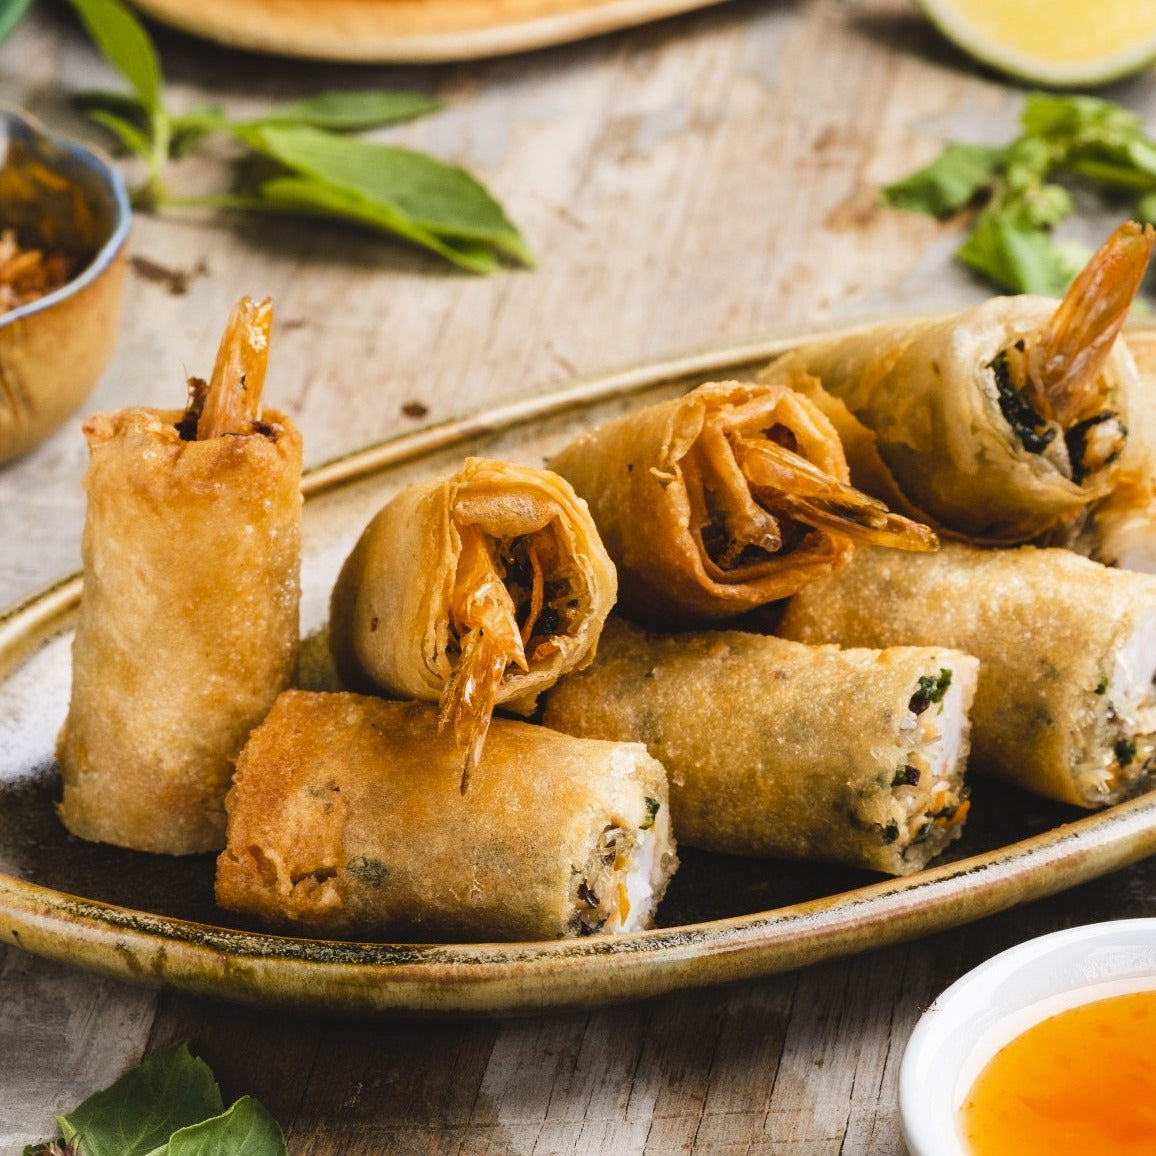 66 Chien Trung Cuon: Fried Egg Rolls with Sweet Chili Sauce – Pho Hoa ...